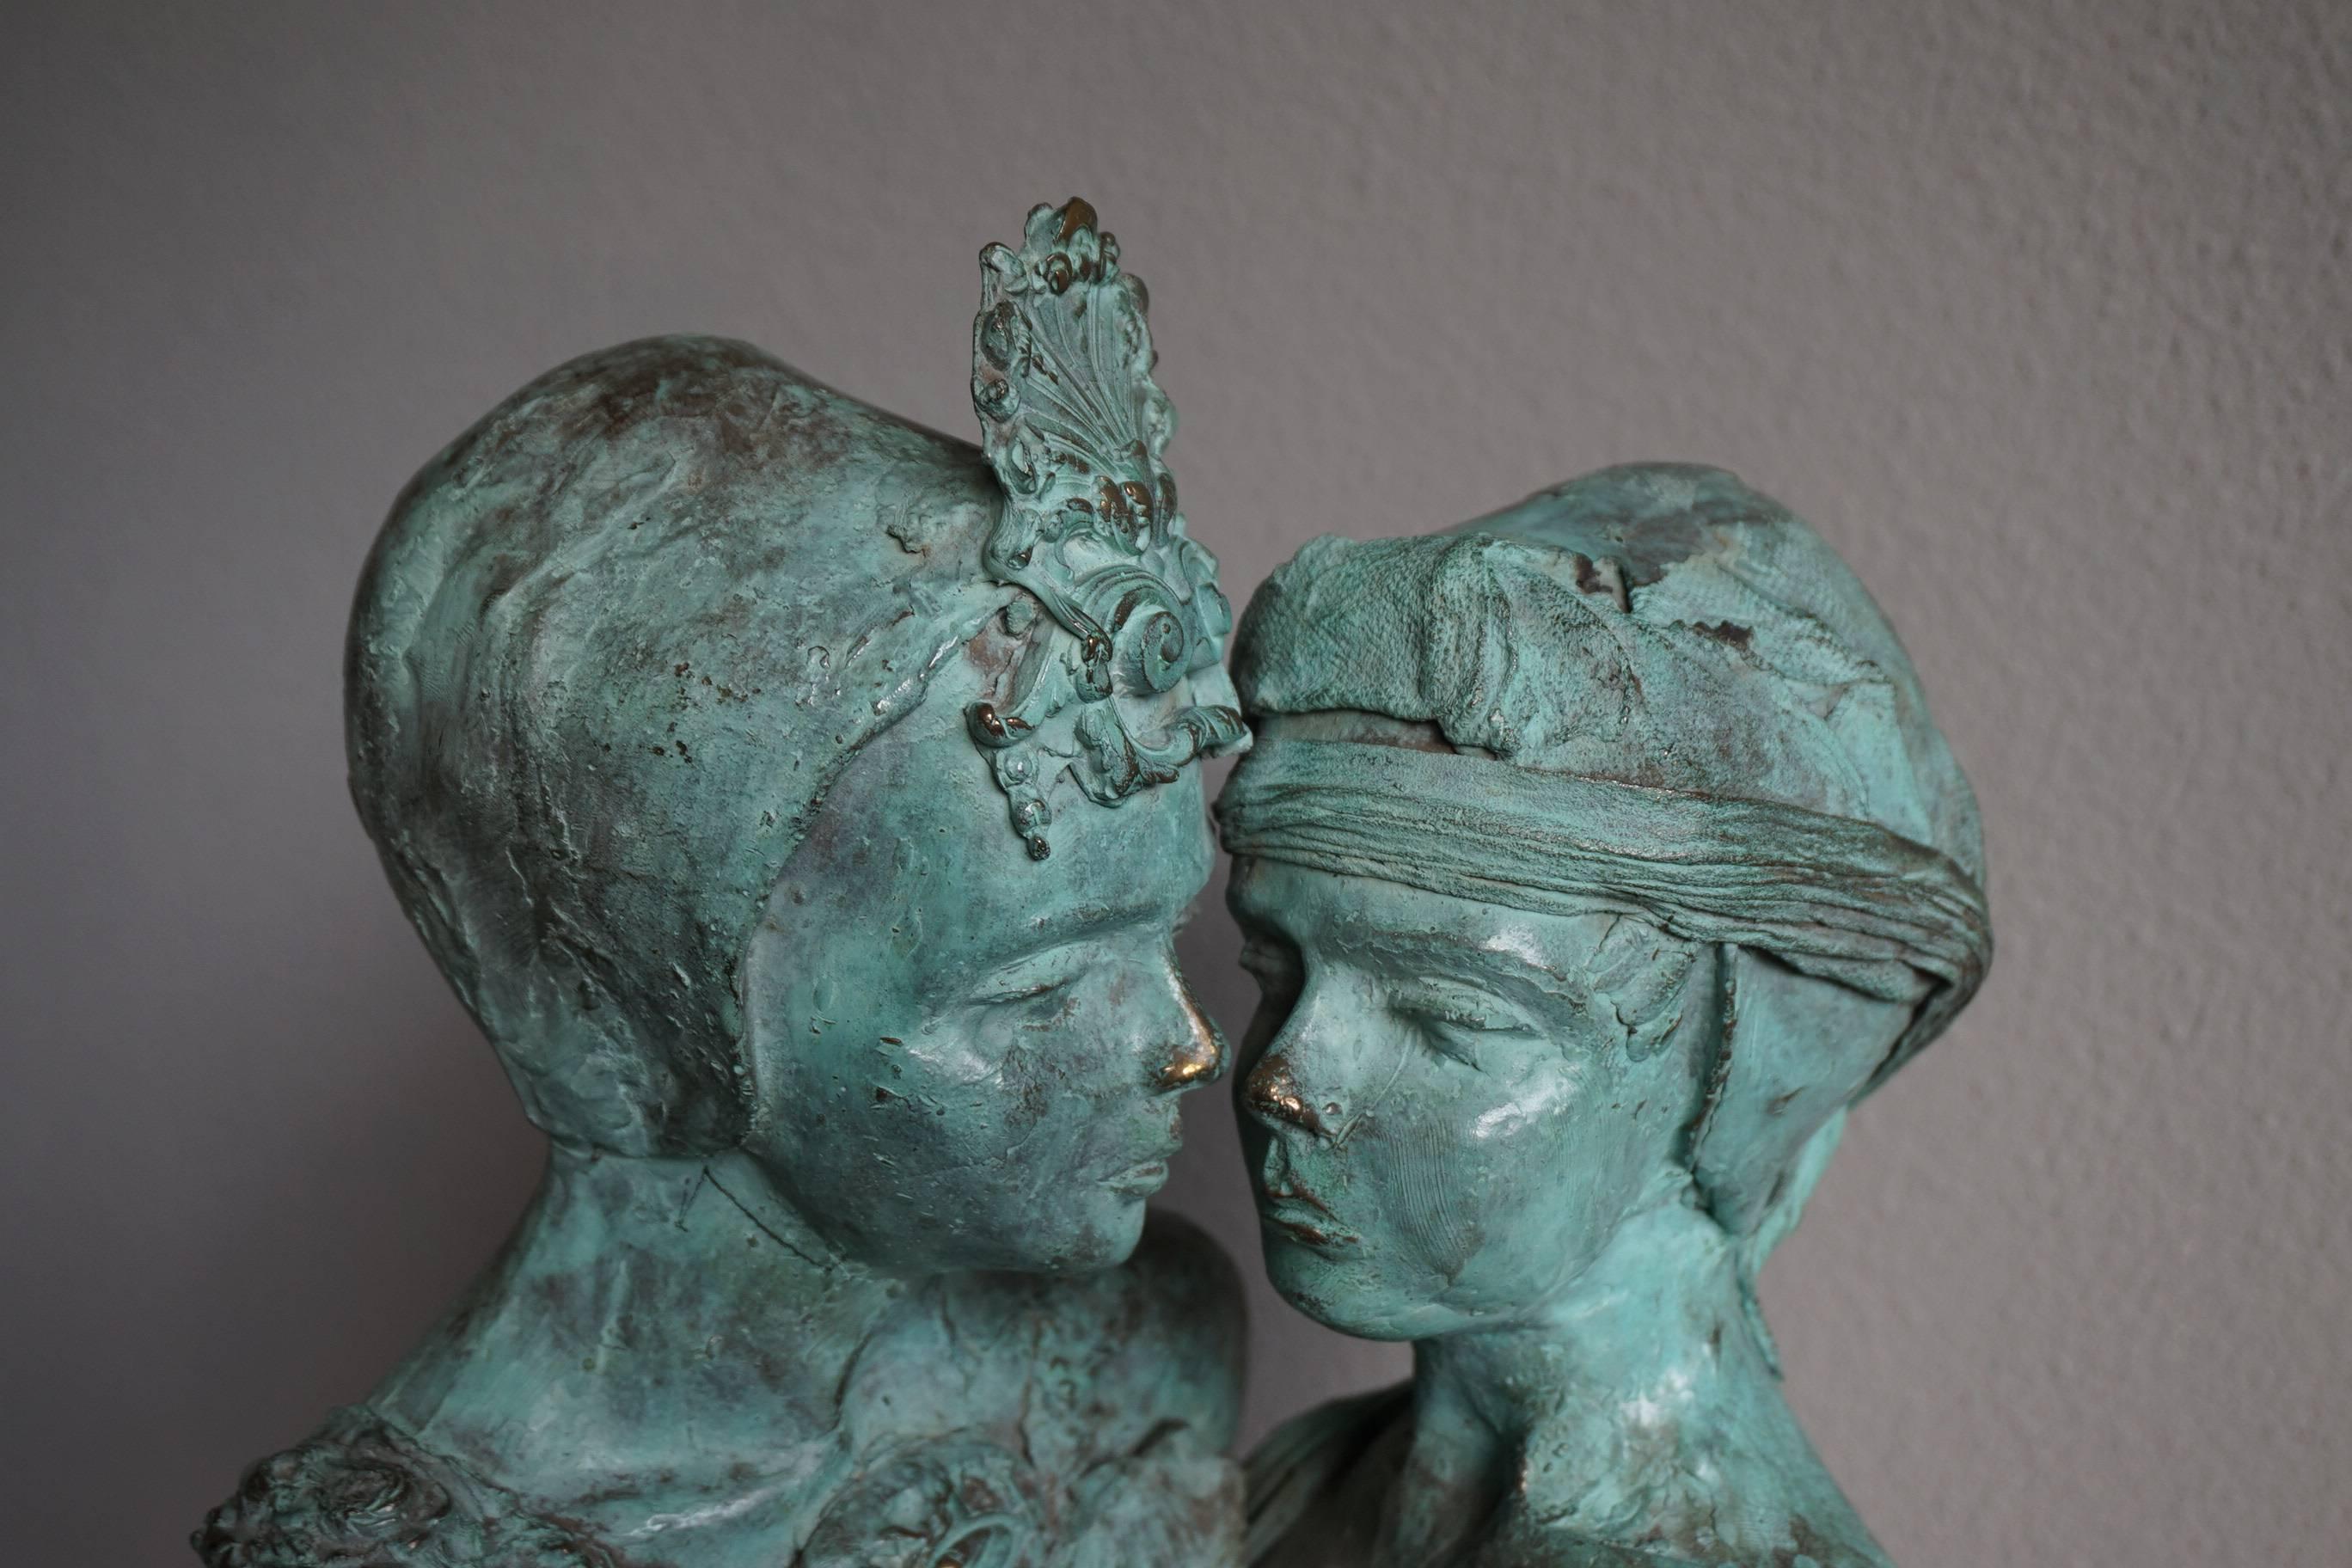 Sensitive and touching double-bust sculpture.

We don't know about the relationship between these two women, but the artist clearly shows us that it is a very intimate one. By placing these serene and silent female faces close to one another, the